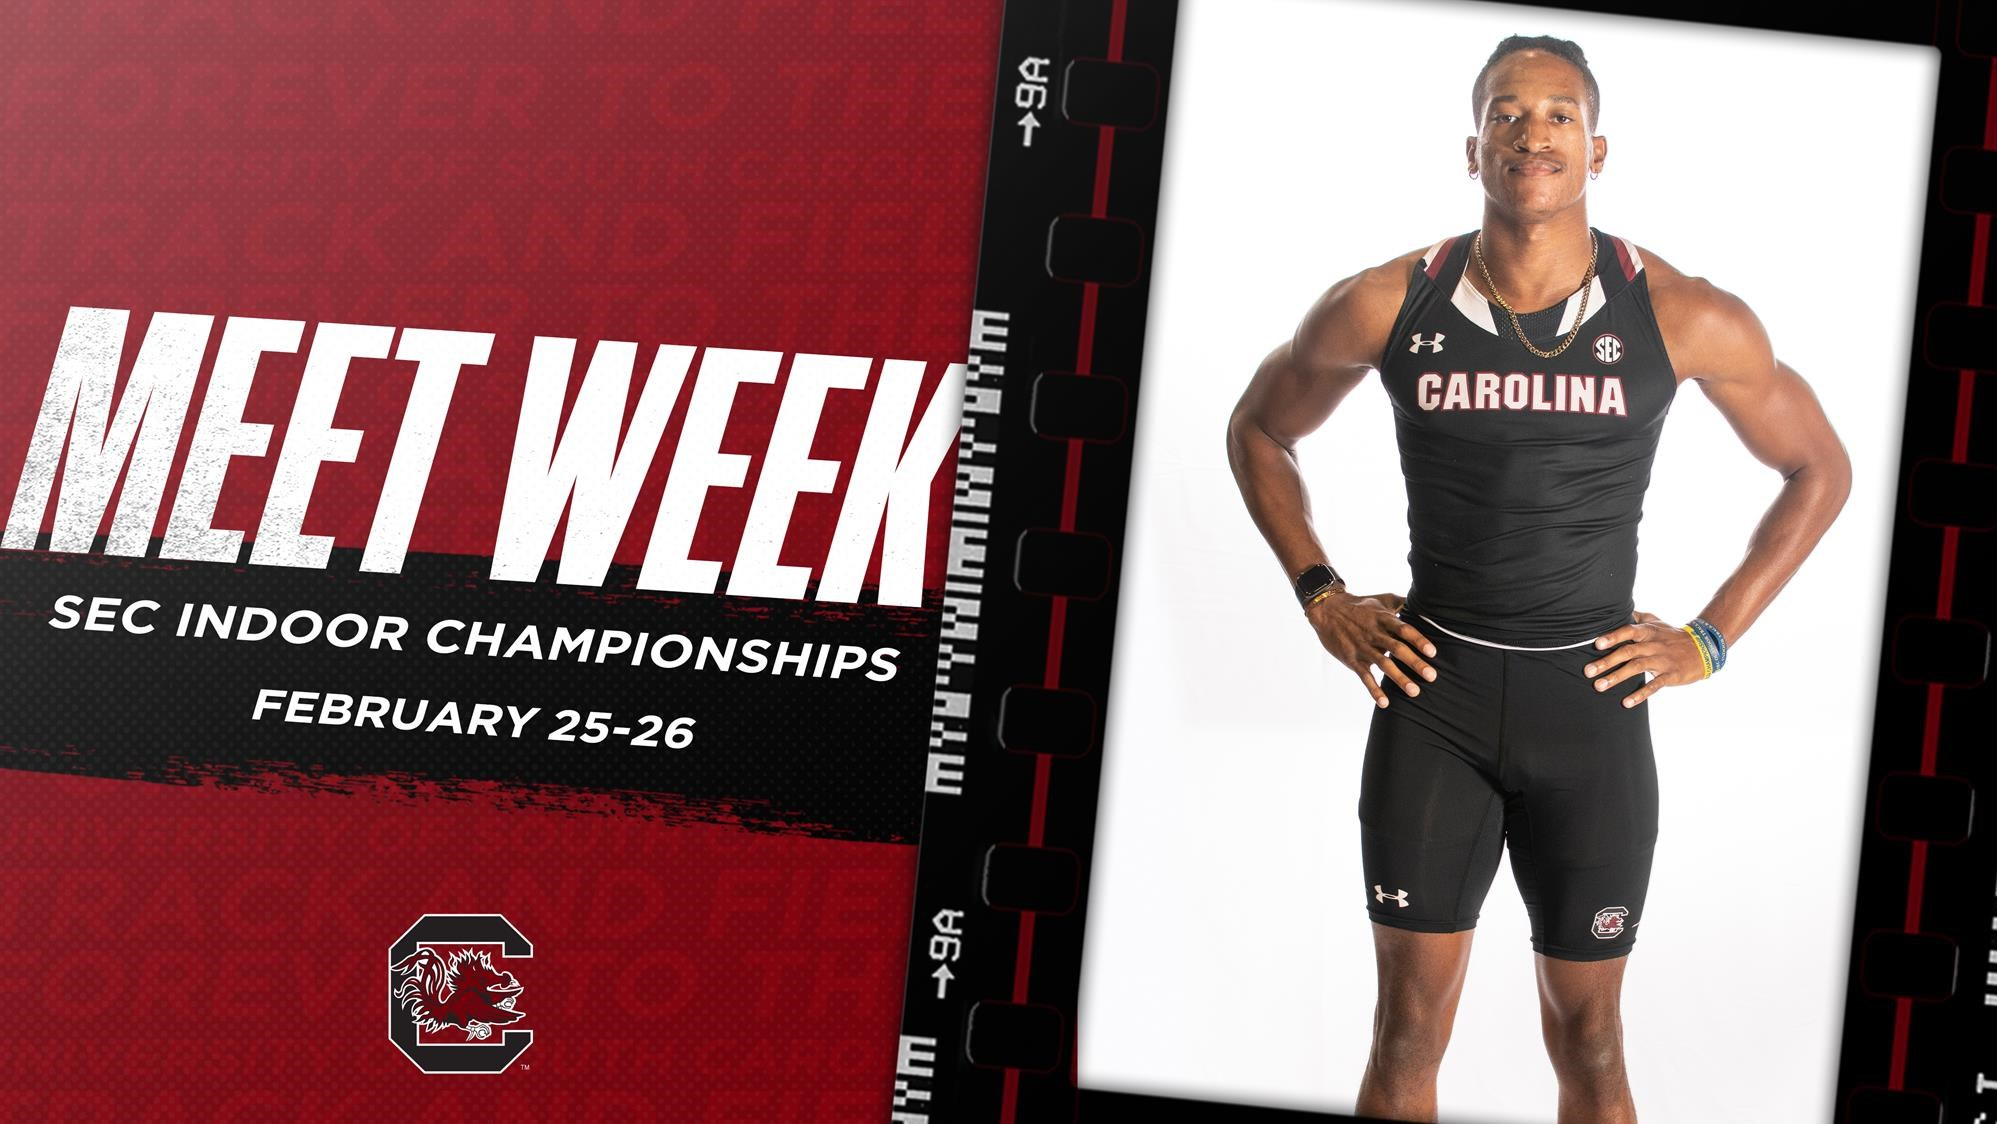 Gamecock Track and Field Sets Sights on SEC Indoor Championships